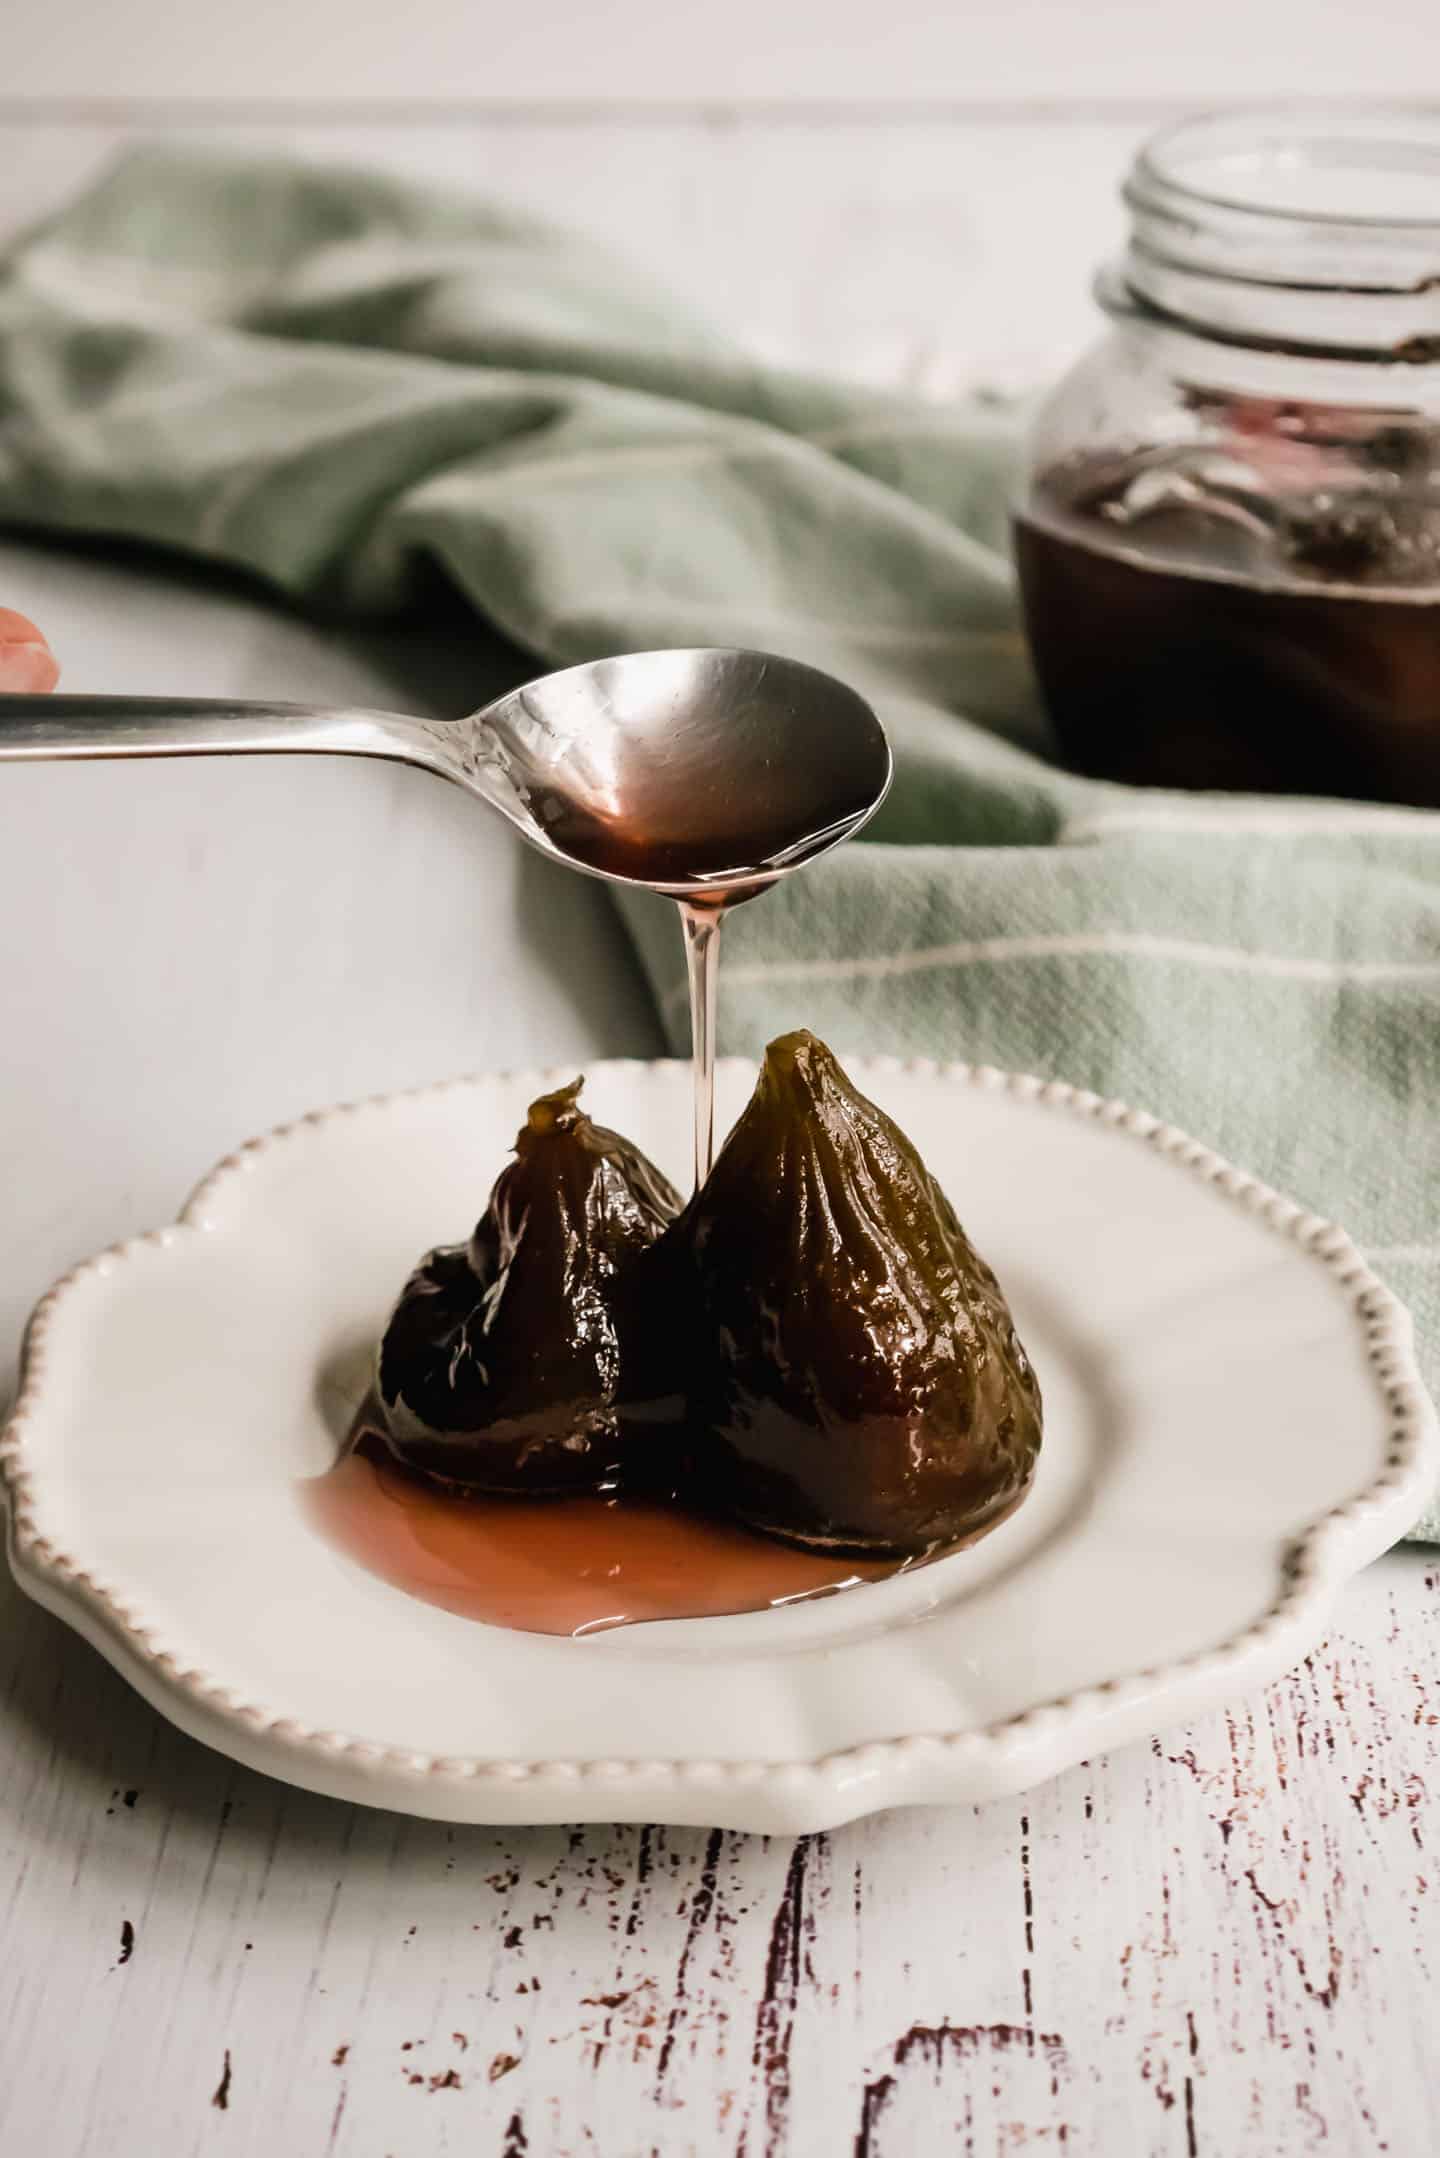 Dripping syrup on figs